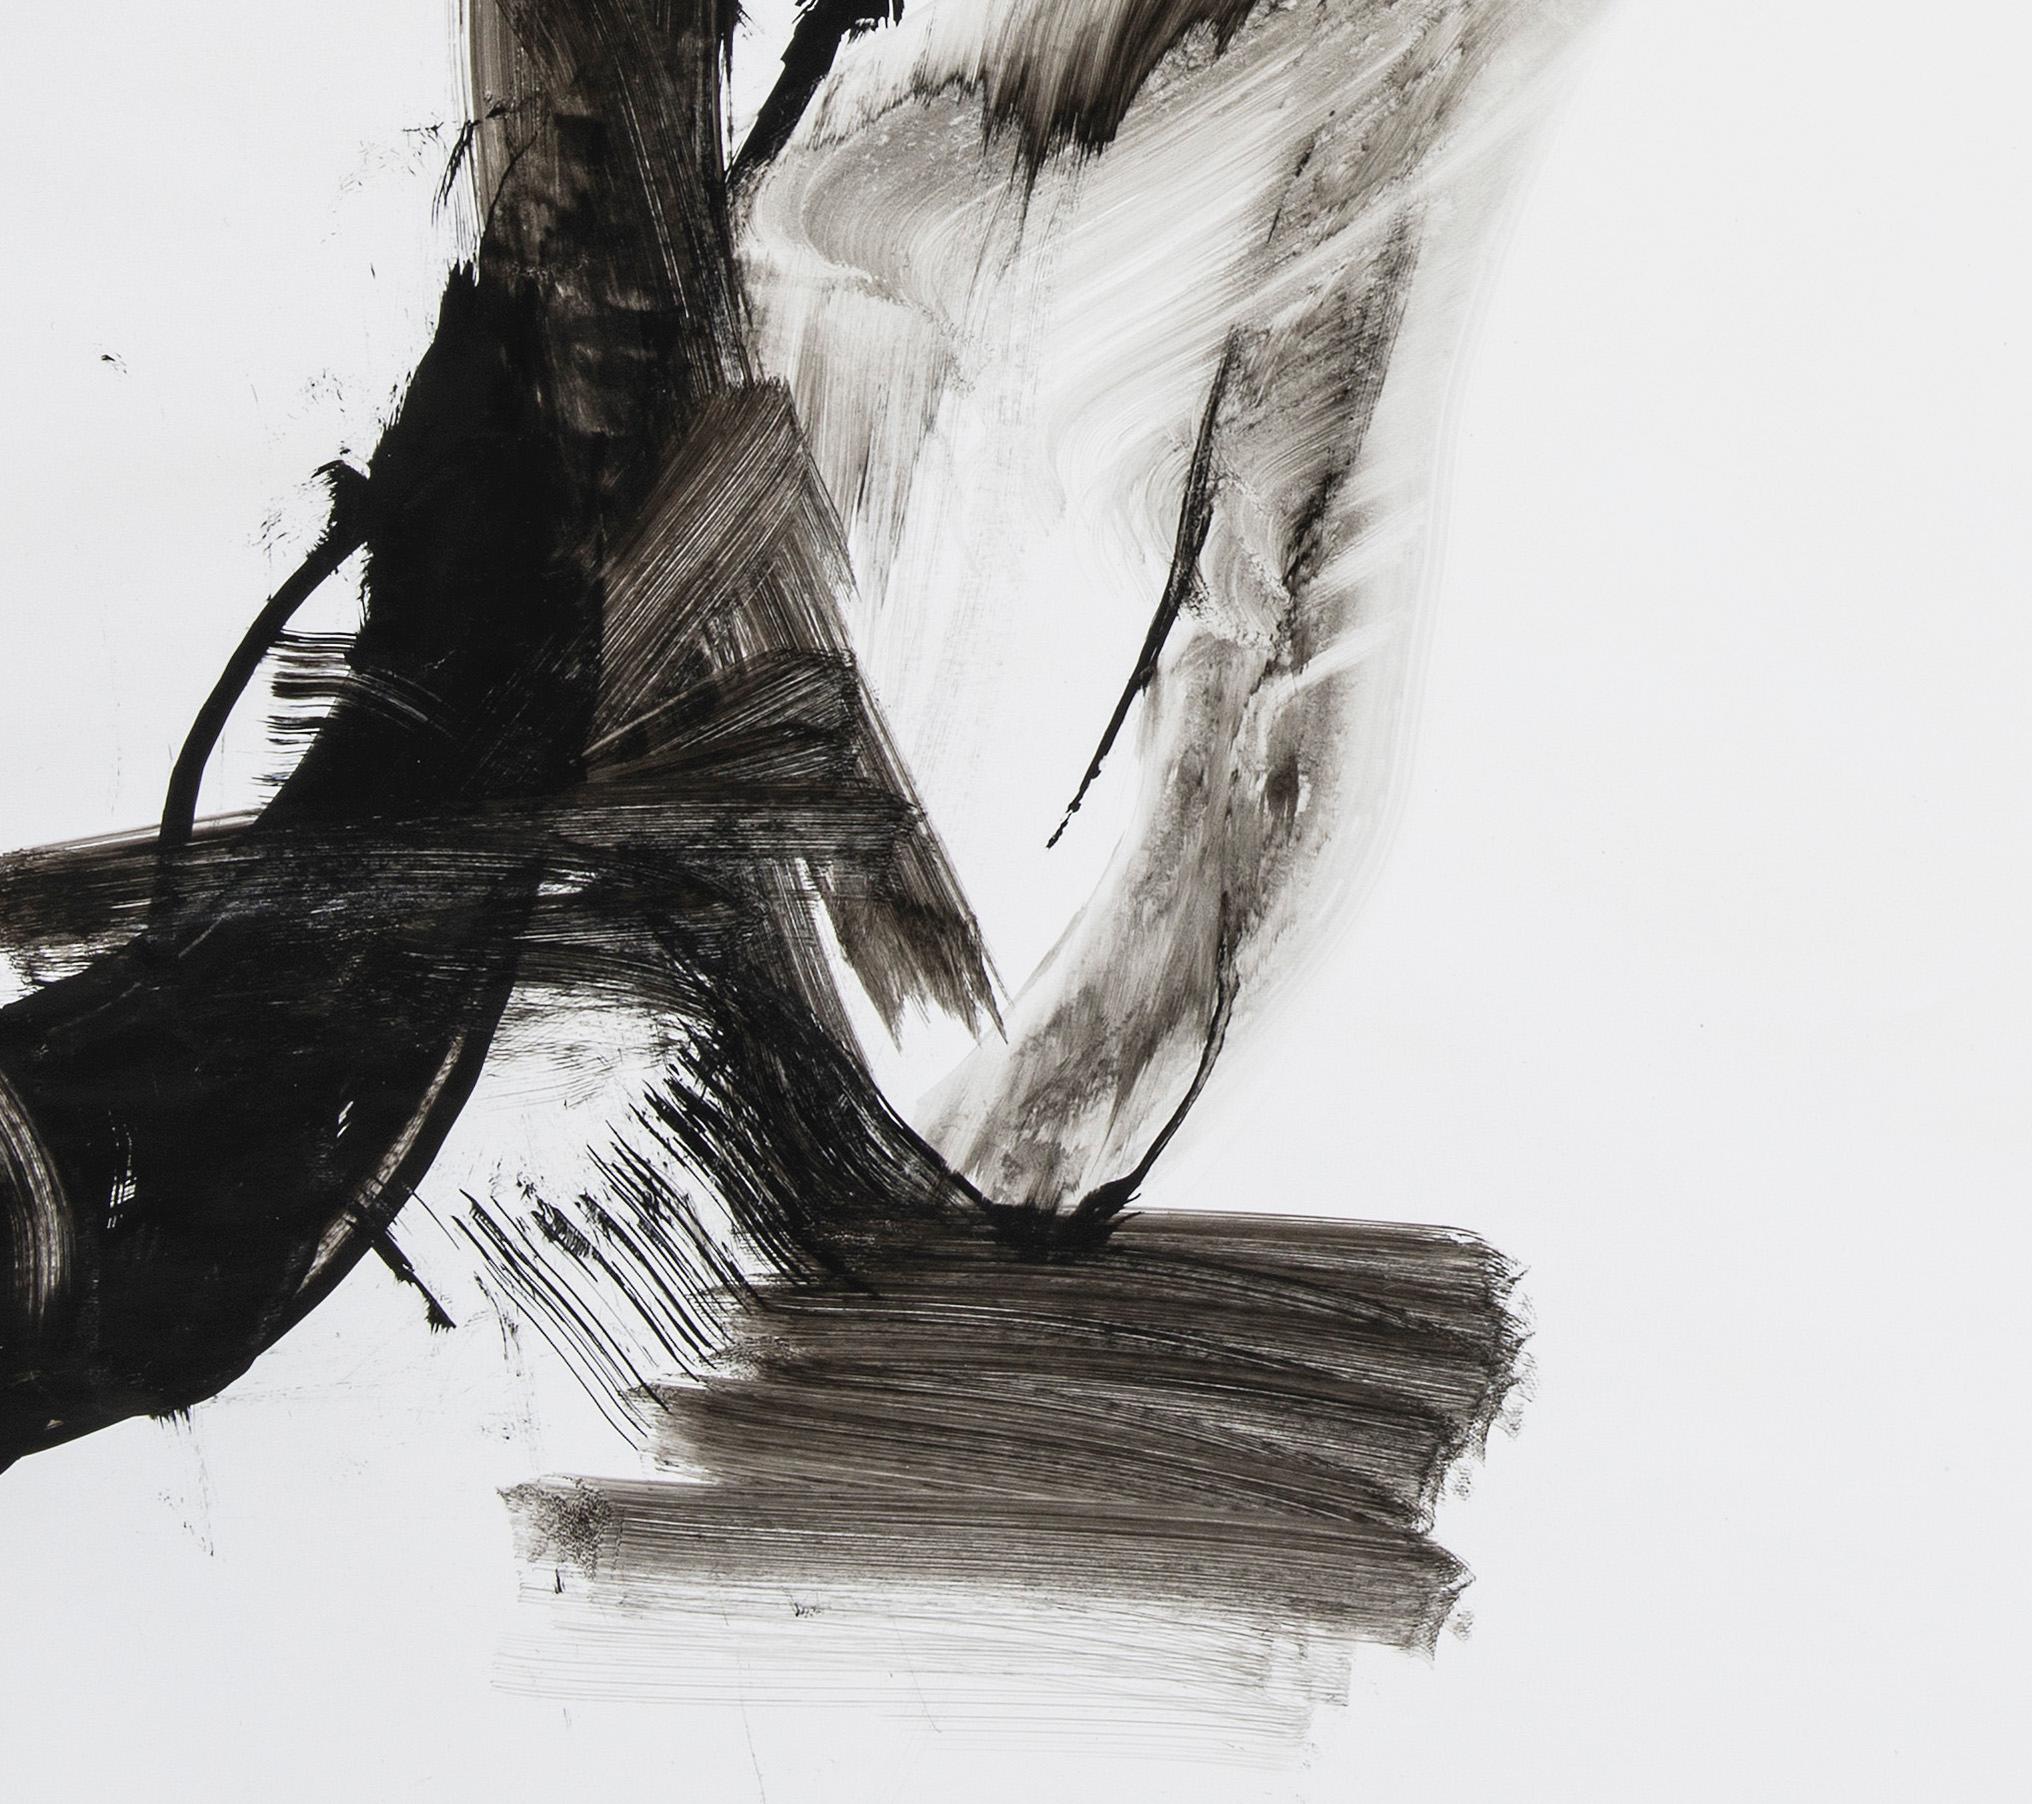 M5 - abstract calligraphy ink wash drawing / painting on paper, in black & white - Art by Nazanin Moghbeli